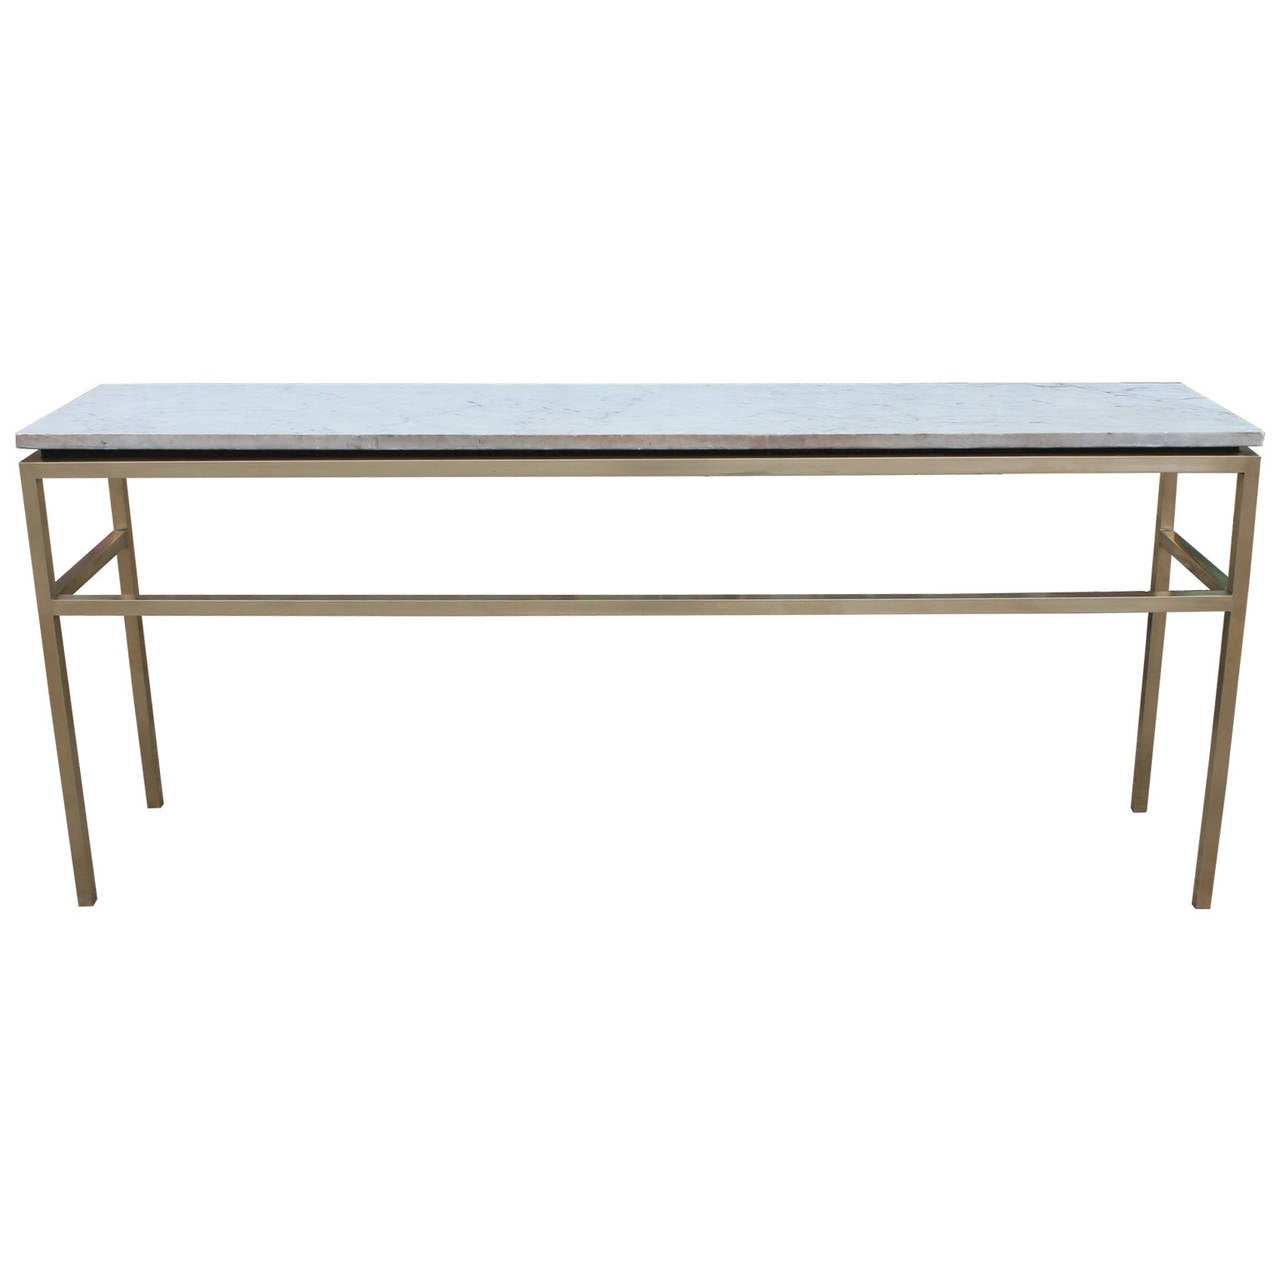 Solid brass and carrara marble console table. Table has clean simple lines providing a certain elegance.